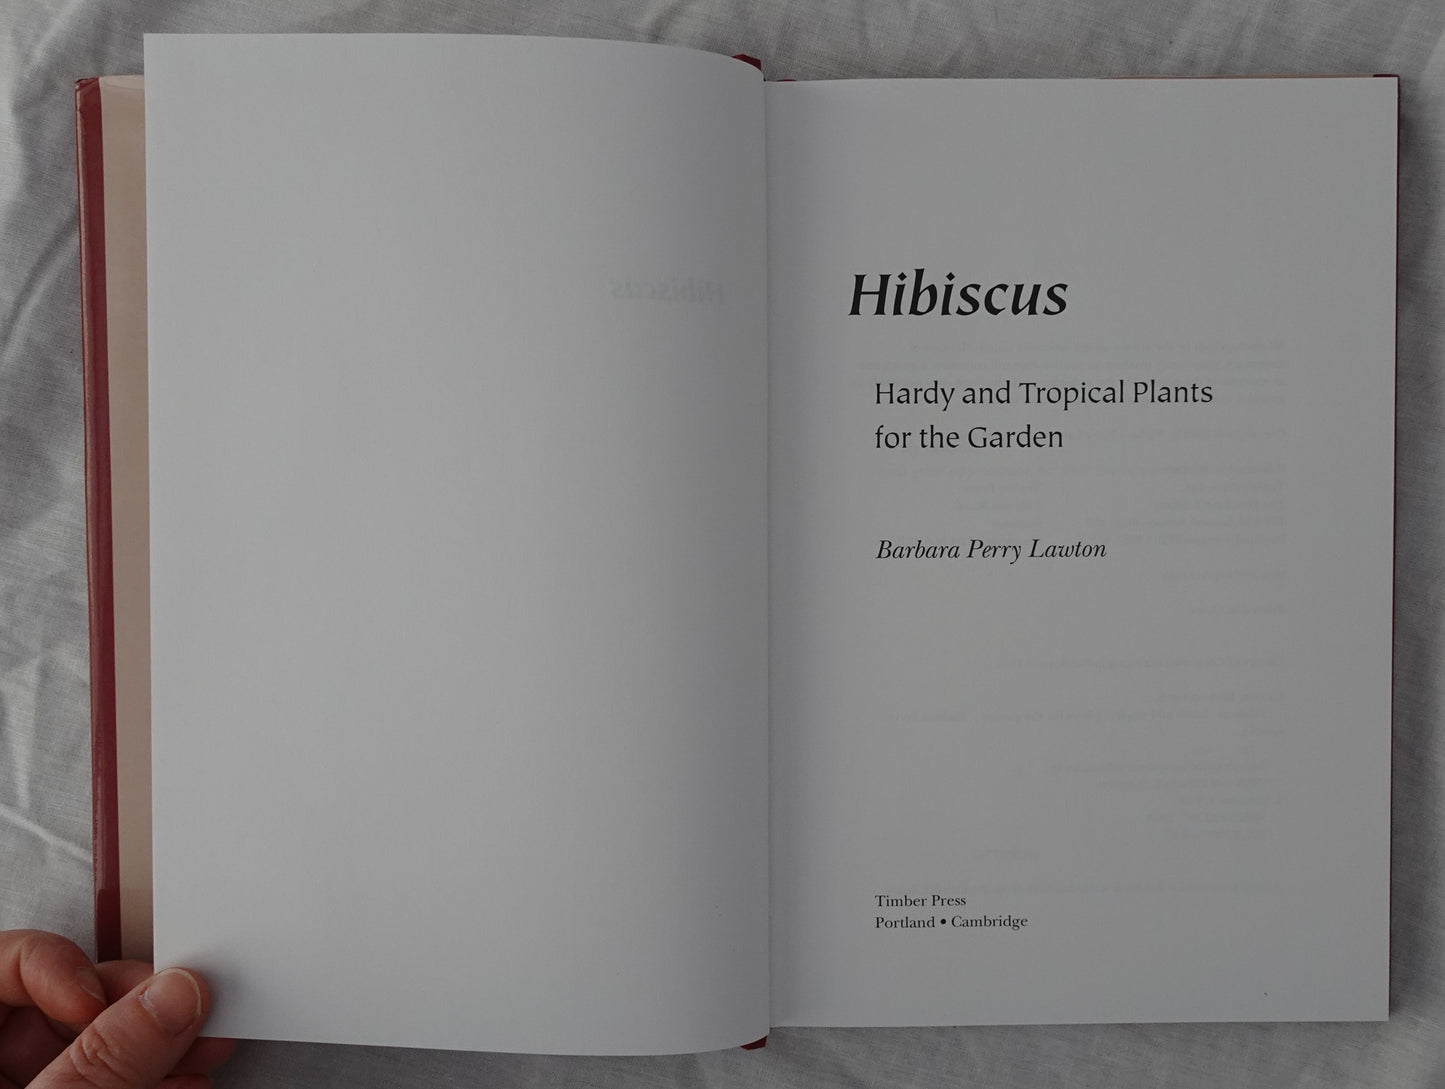 Hibiscus by Barbara Perry Lawton